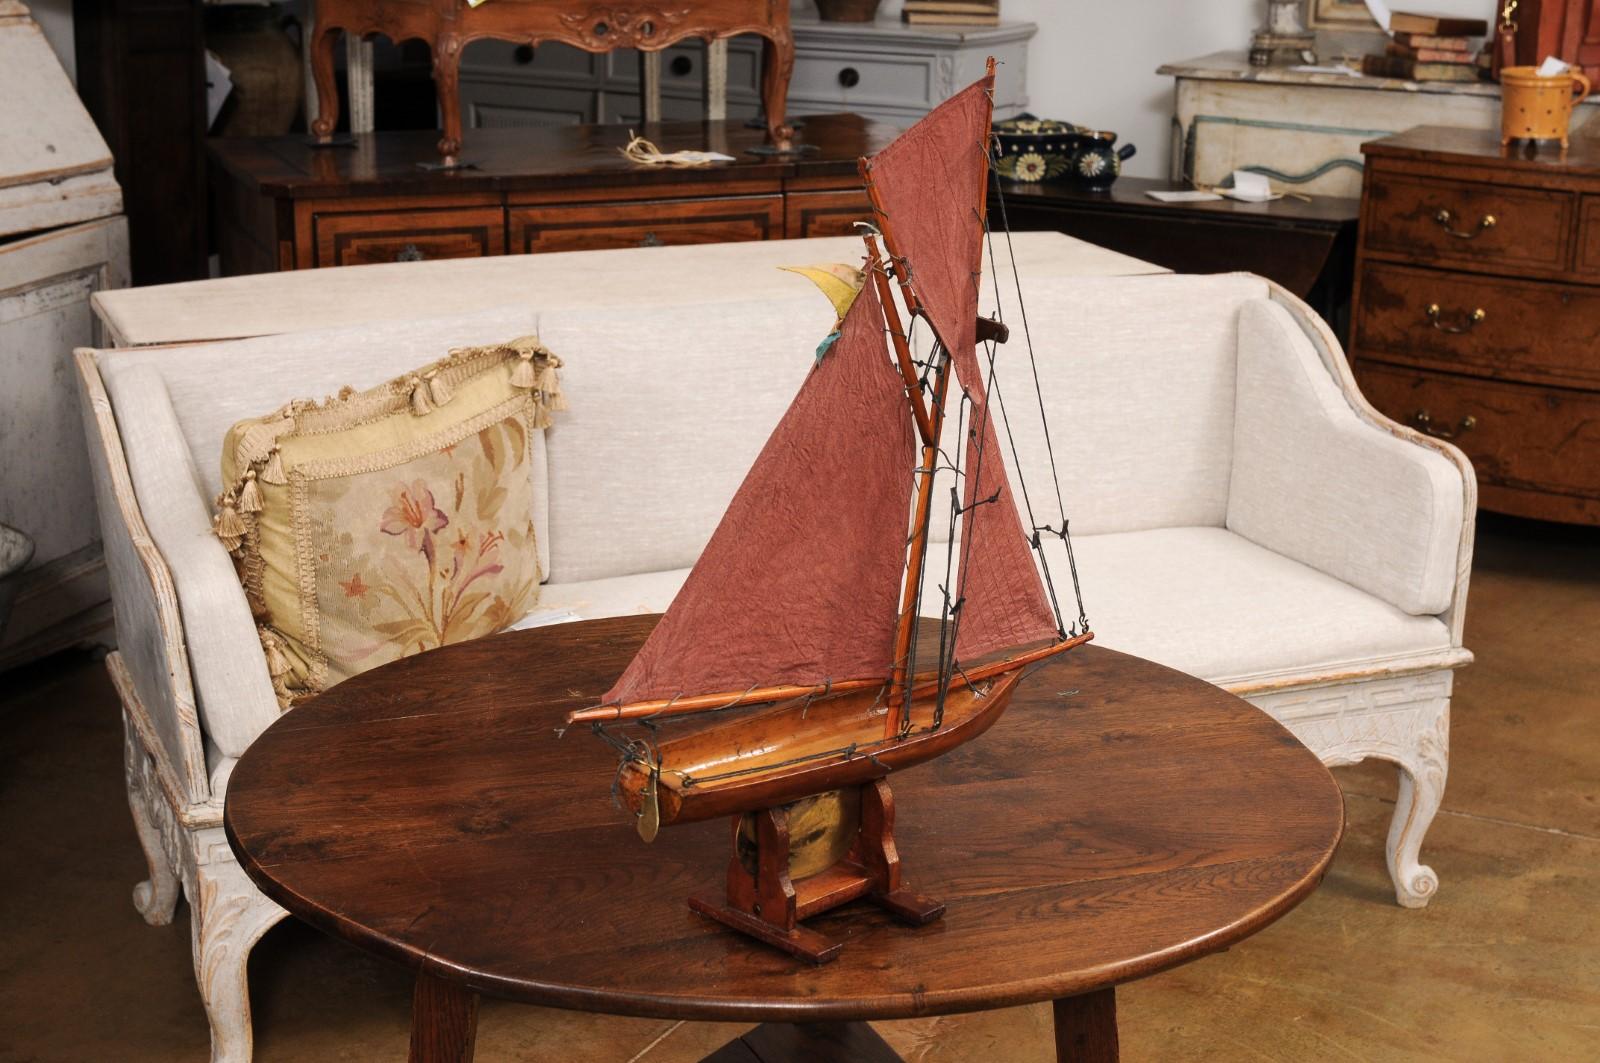 Canvas English 1920s George V Period Gaff Cutter Pond Yacht with Red Sails For Sale